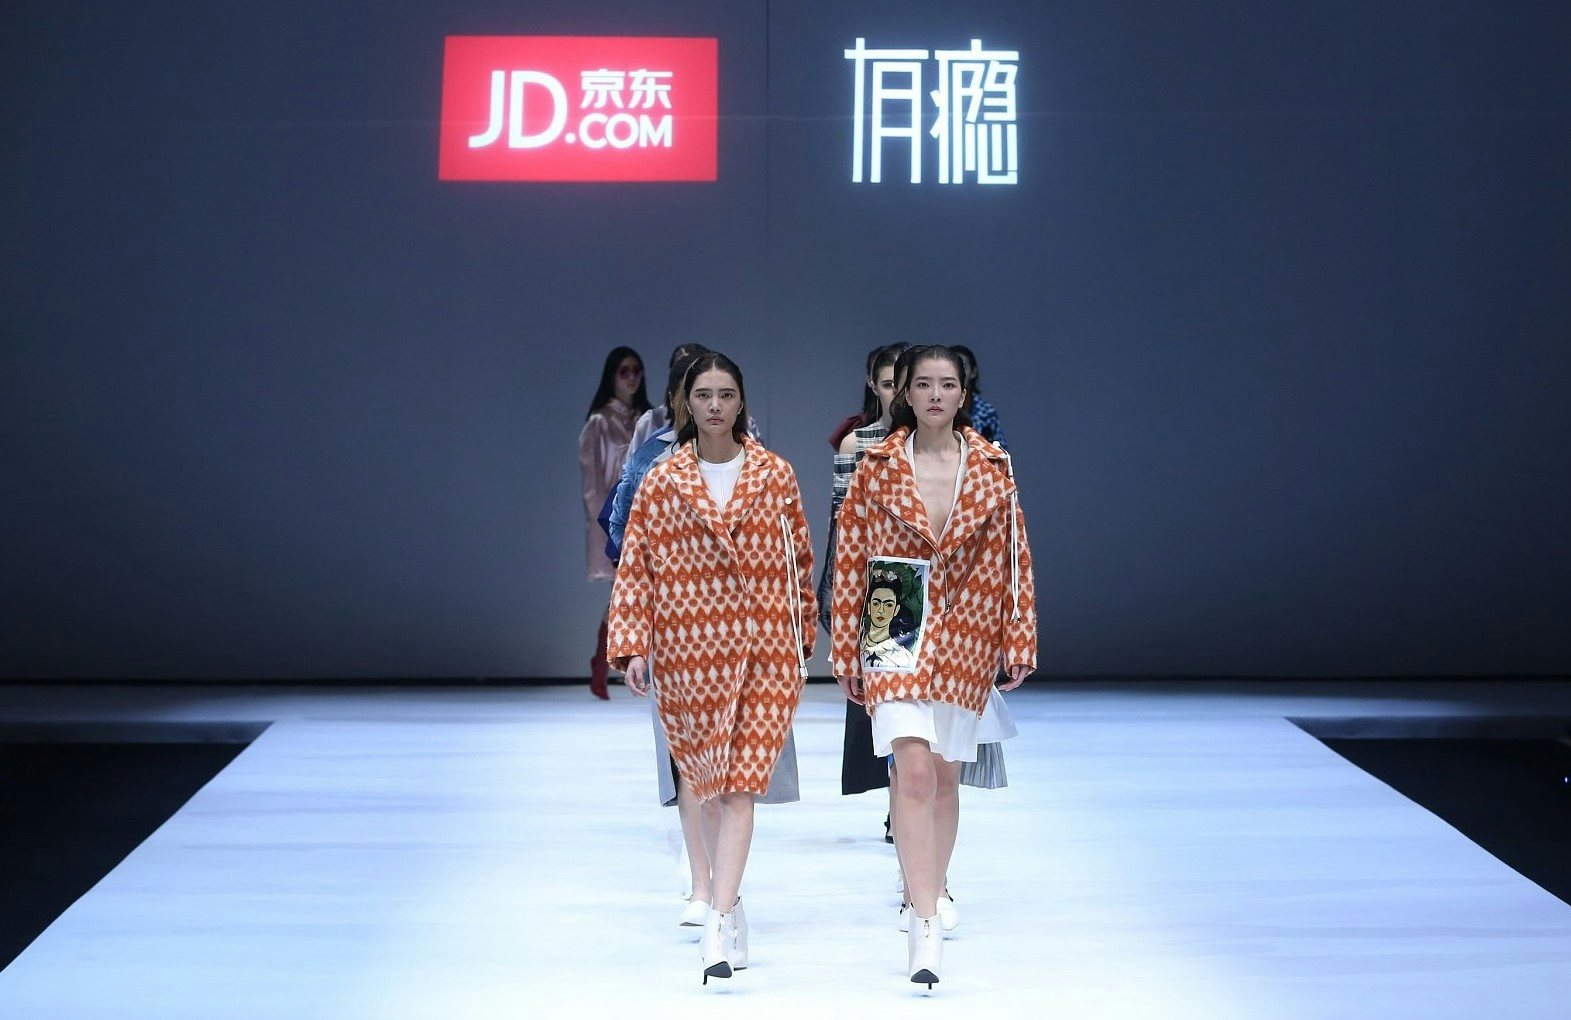 JD.com sponsored the runway show of Chinese fashion designer Han Dongyang at the 2017 Autumn/Winter China Fashion Week in Beijing. Image via VCG